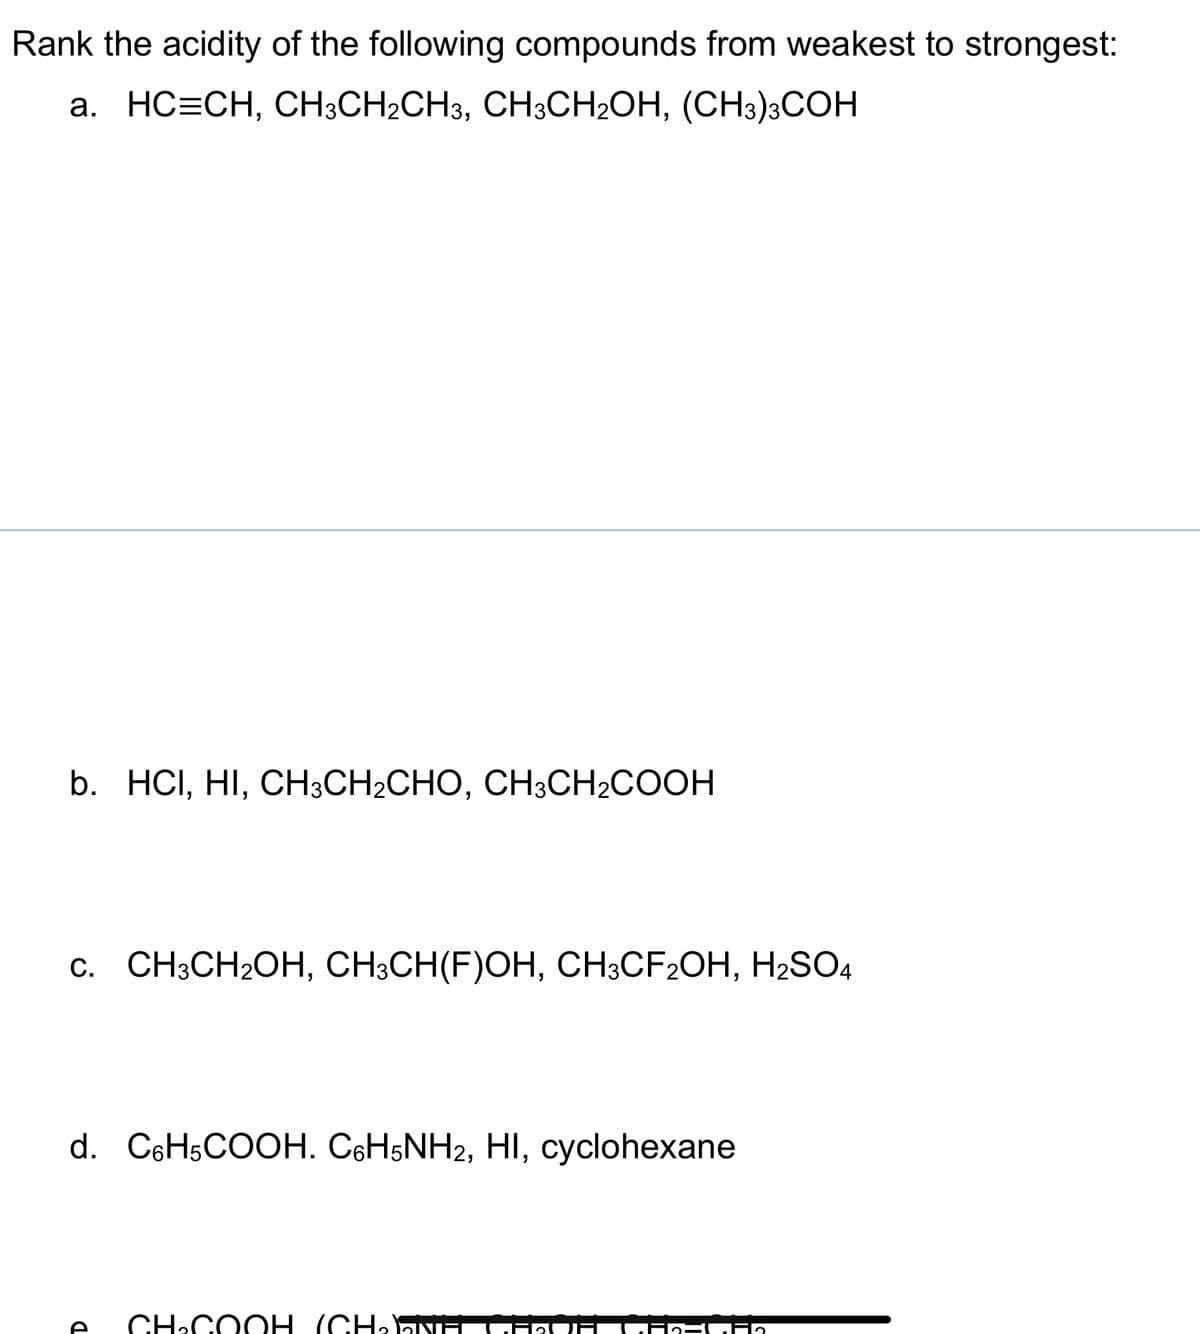 Rank the acidity of the following compounds from weakest to strongest:
a. HC=CH, CH³CH₂CH3, CH3CH₂OH, (CH3)3COH
b. HCI, HI, CH3CH2CHO, CH3CH2COOH
c. CH3CH₂OH, CH3CH(F)OH, CH3CF2OH, H₂SO4
d. C6H5COOH. C6H5NH2, HI, cyclohexane
CH.COOH (CH,NH
ECF2